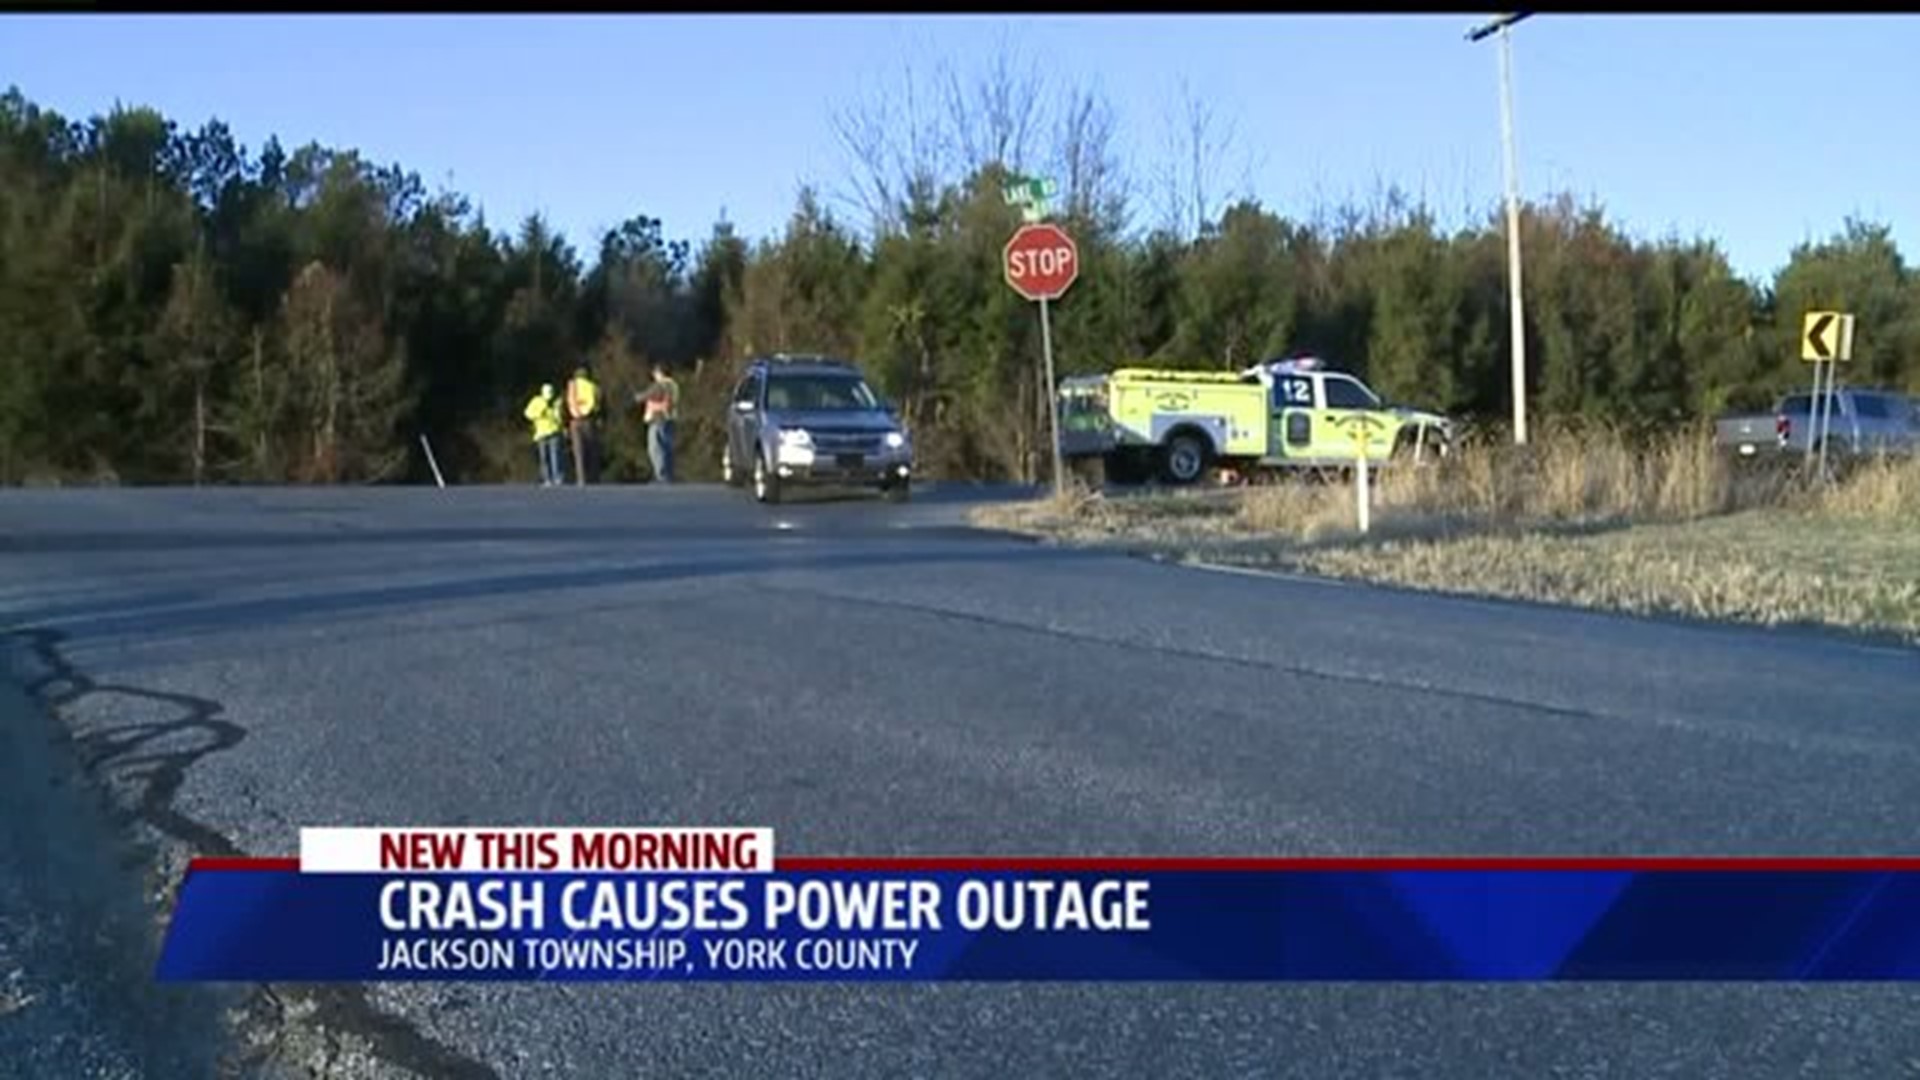 Crash in Jackson Township causes power outages in Spring Grove